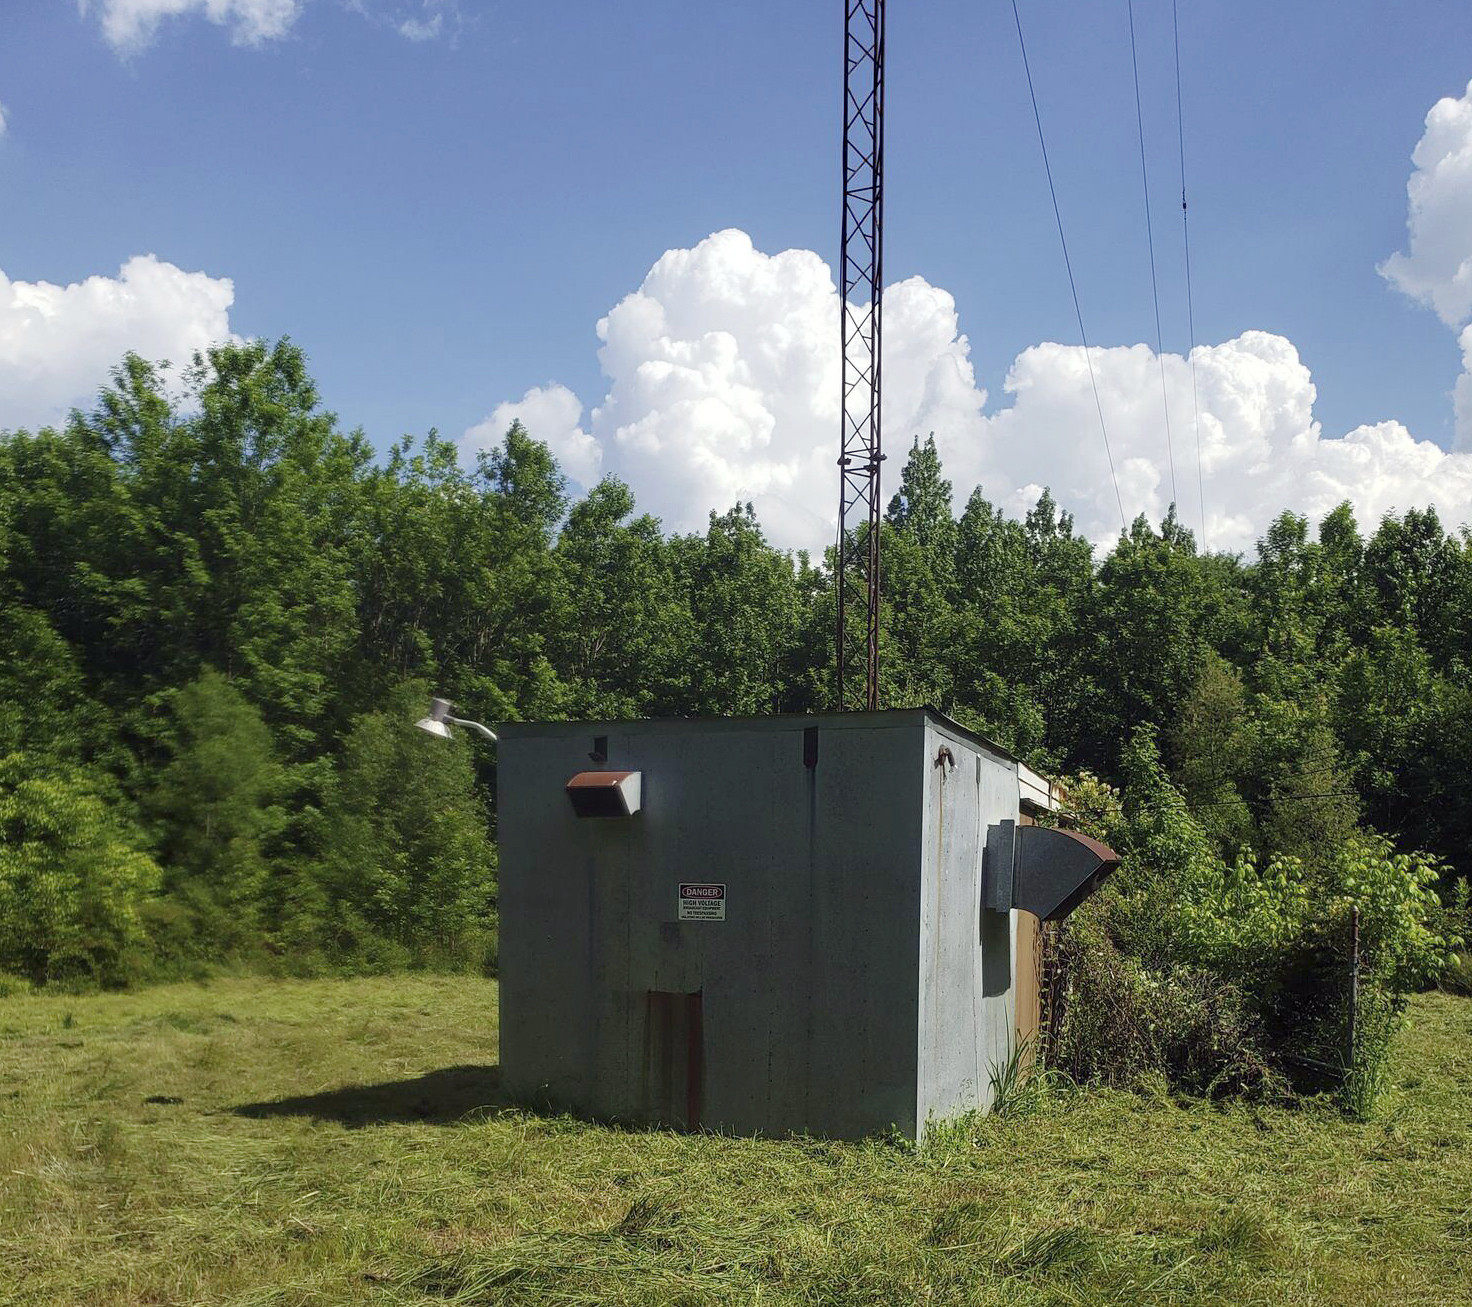 A thief or thieves made off with the 60-metre tower, shutting down WJLX radio in Jasper, Alabama. So far, no arrests have been made. Photo: WJLX radio